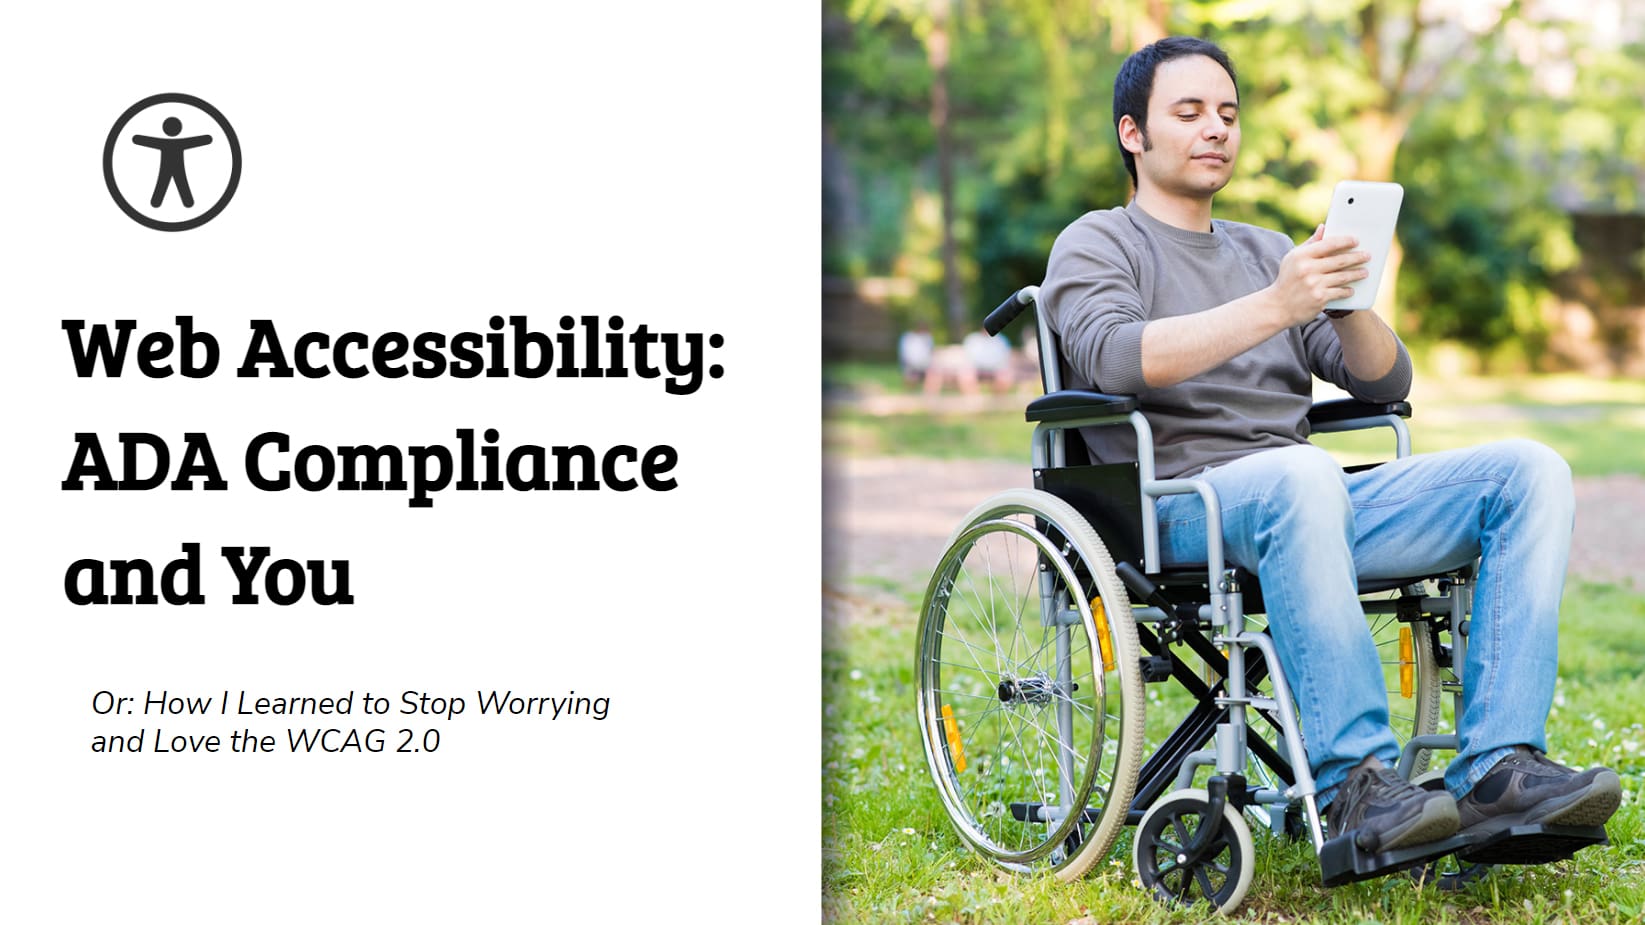 Title says, Web Accessibility: ADA Compliance And You. Subtitle says, Or, How I Learned To Stop Worrying and Love the WCAG 2.0.